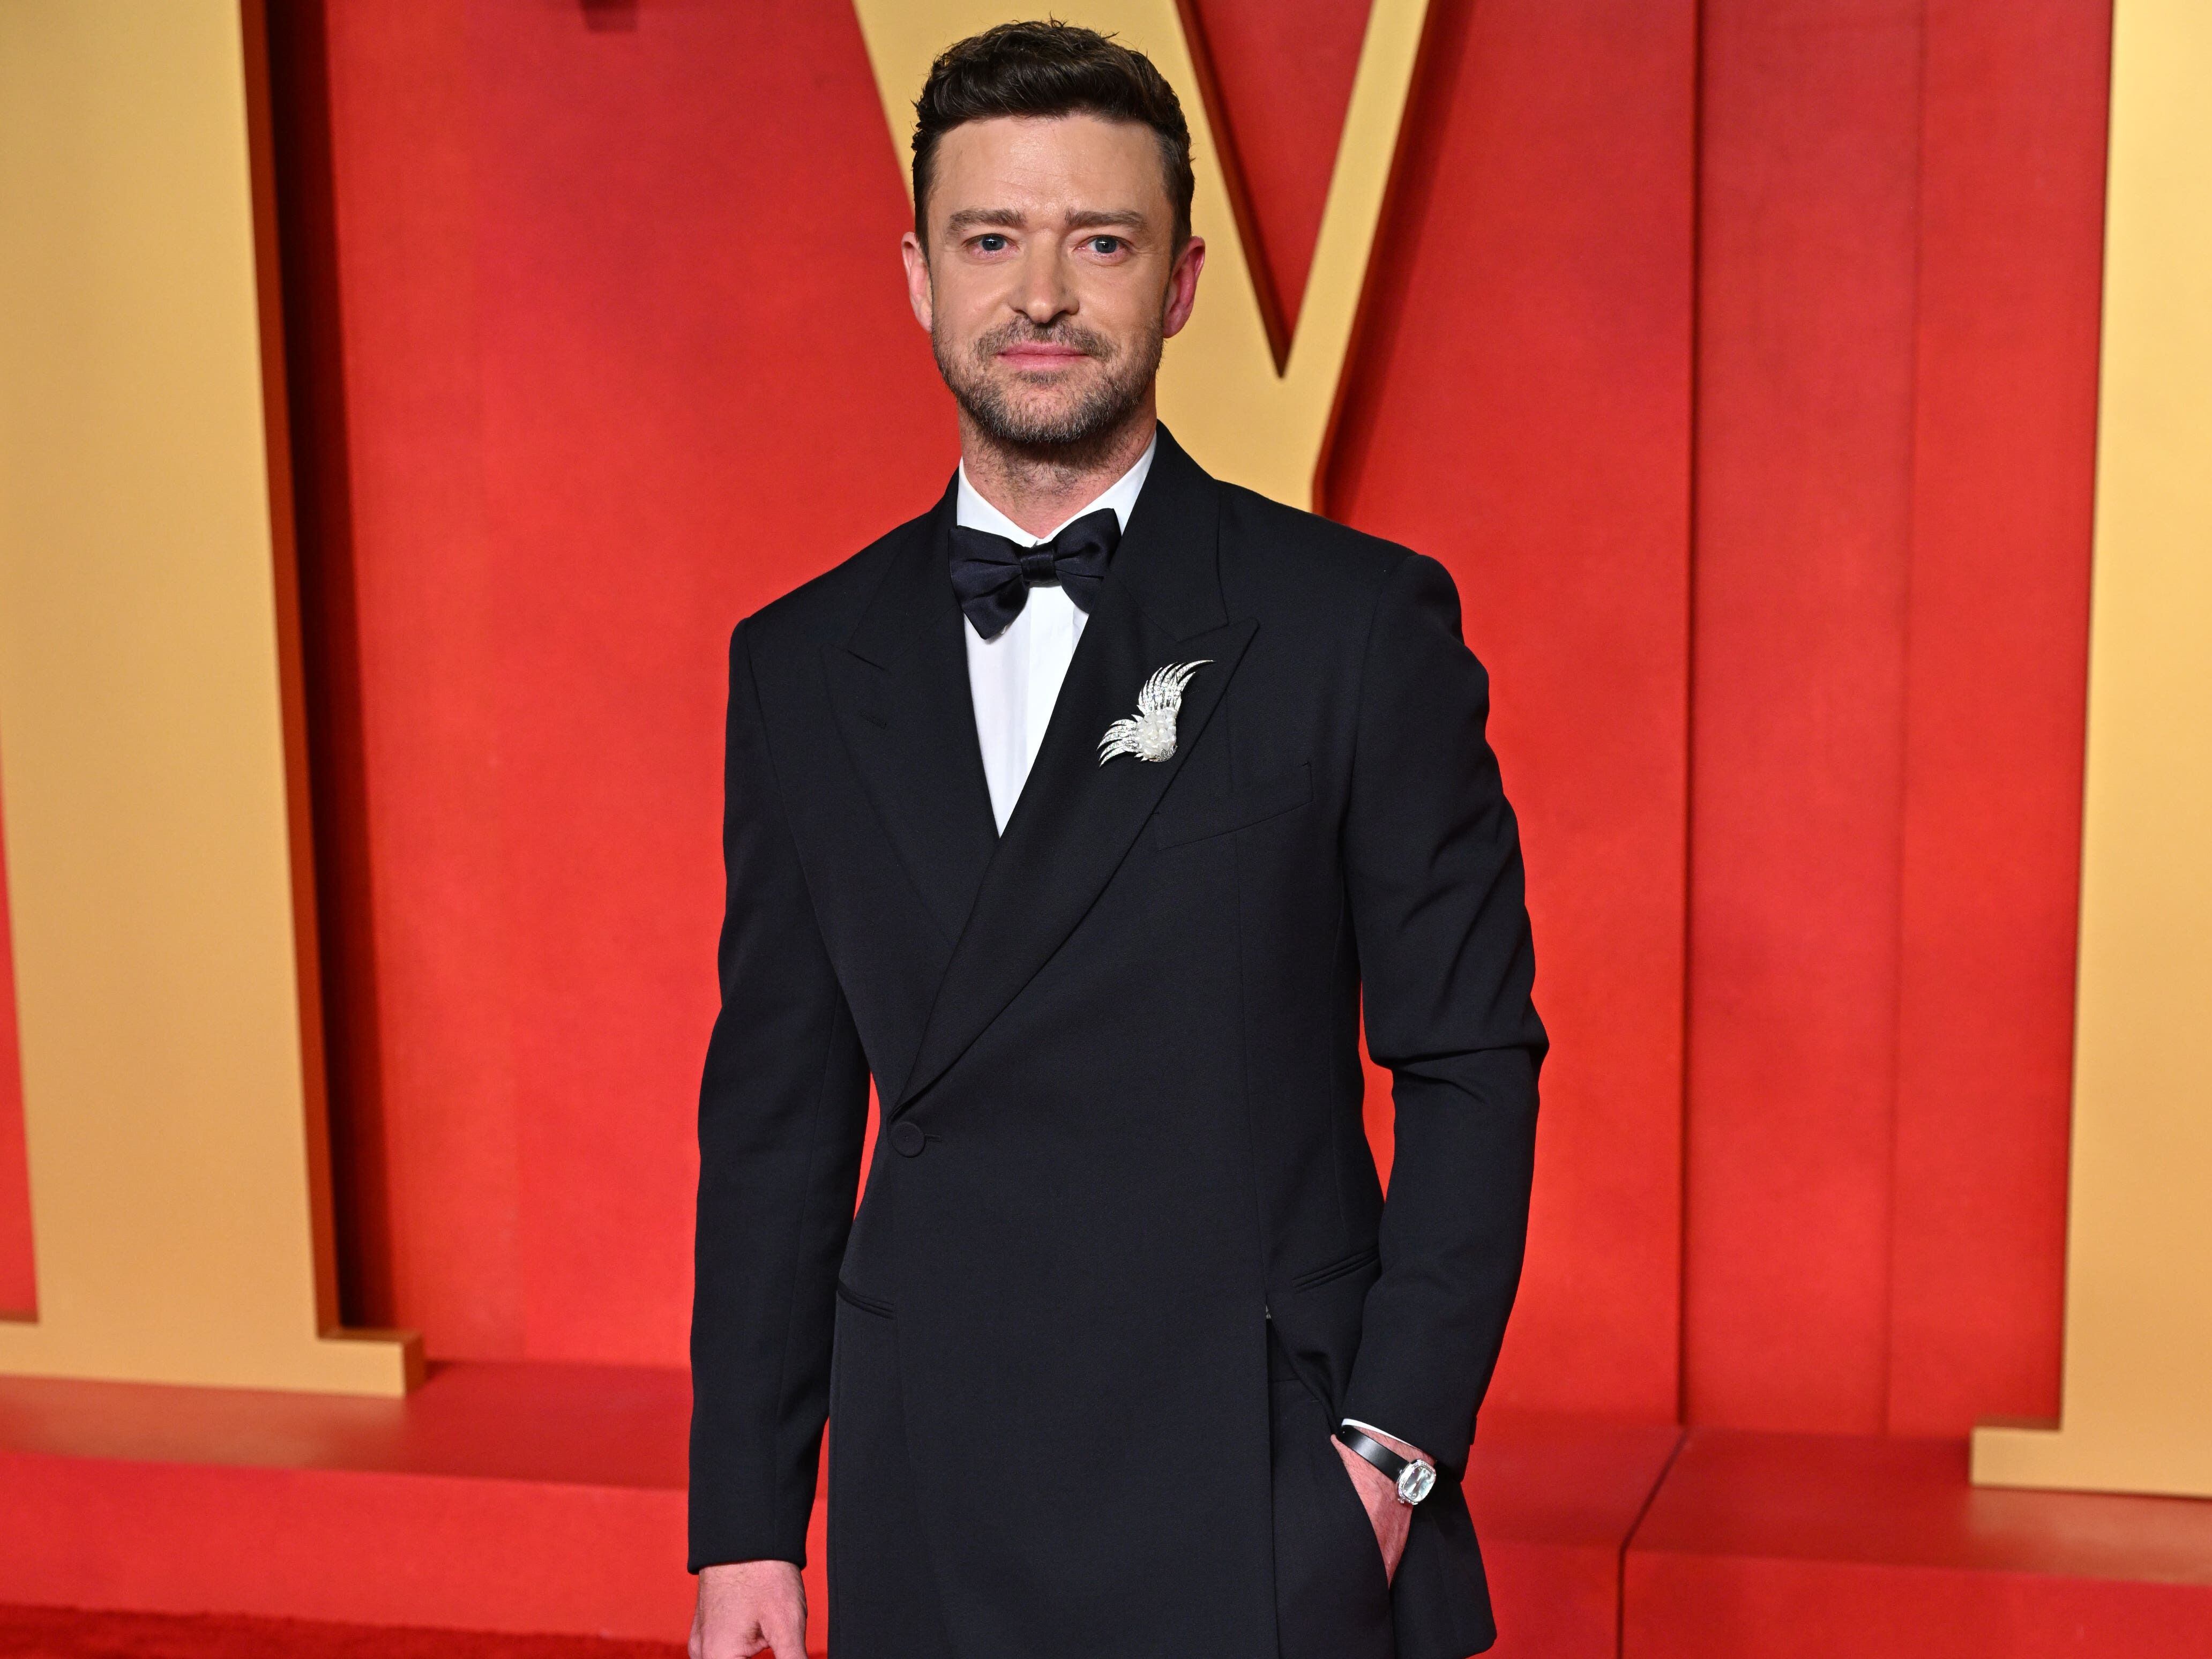 Justin Timberlake admits ‘it’s been a tough week’ at first concert since arrest